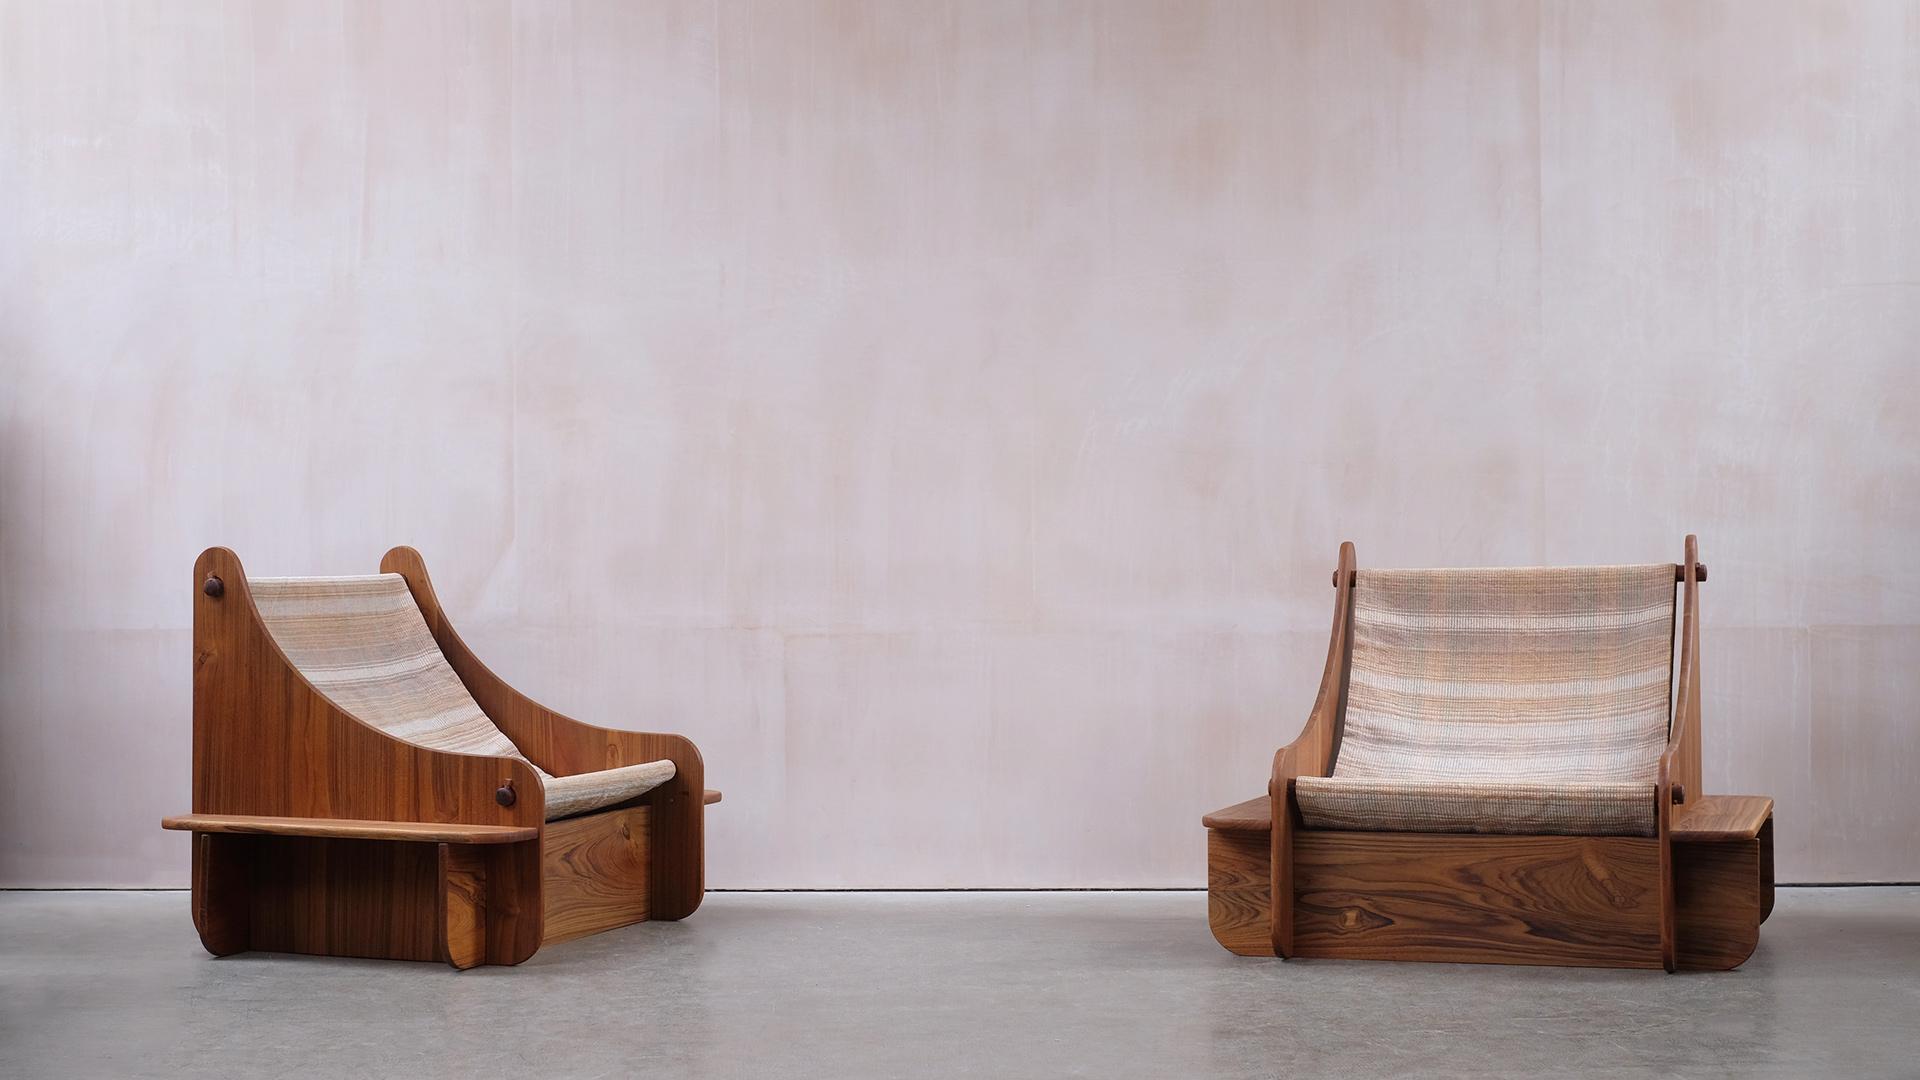 Amazing pair of solid teak lounge chairs designed and made in Hyderabad, India 1970’s. Low and wide and with a heavy cotton sling seat, the chairs are super cool and comfortable too. Very high quality and super original chairs.